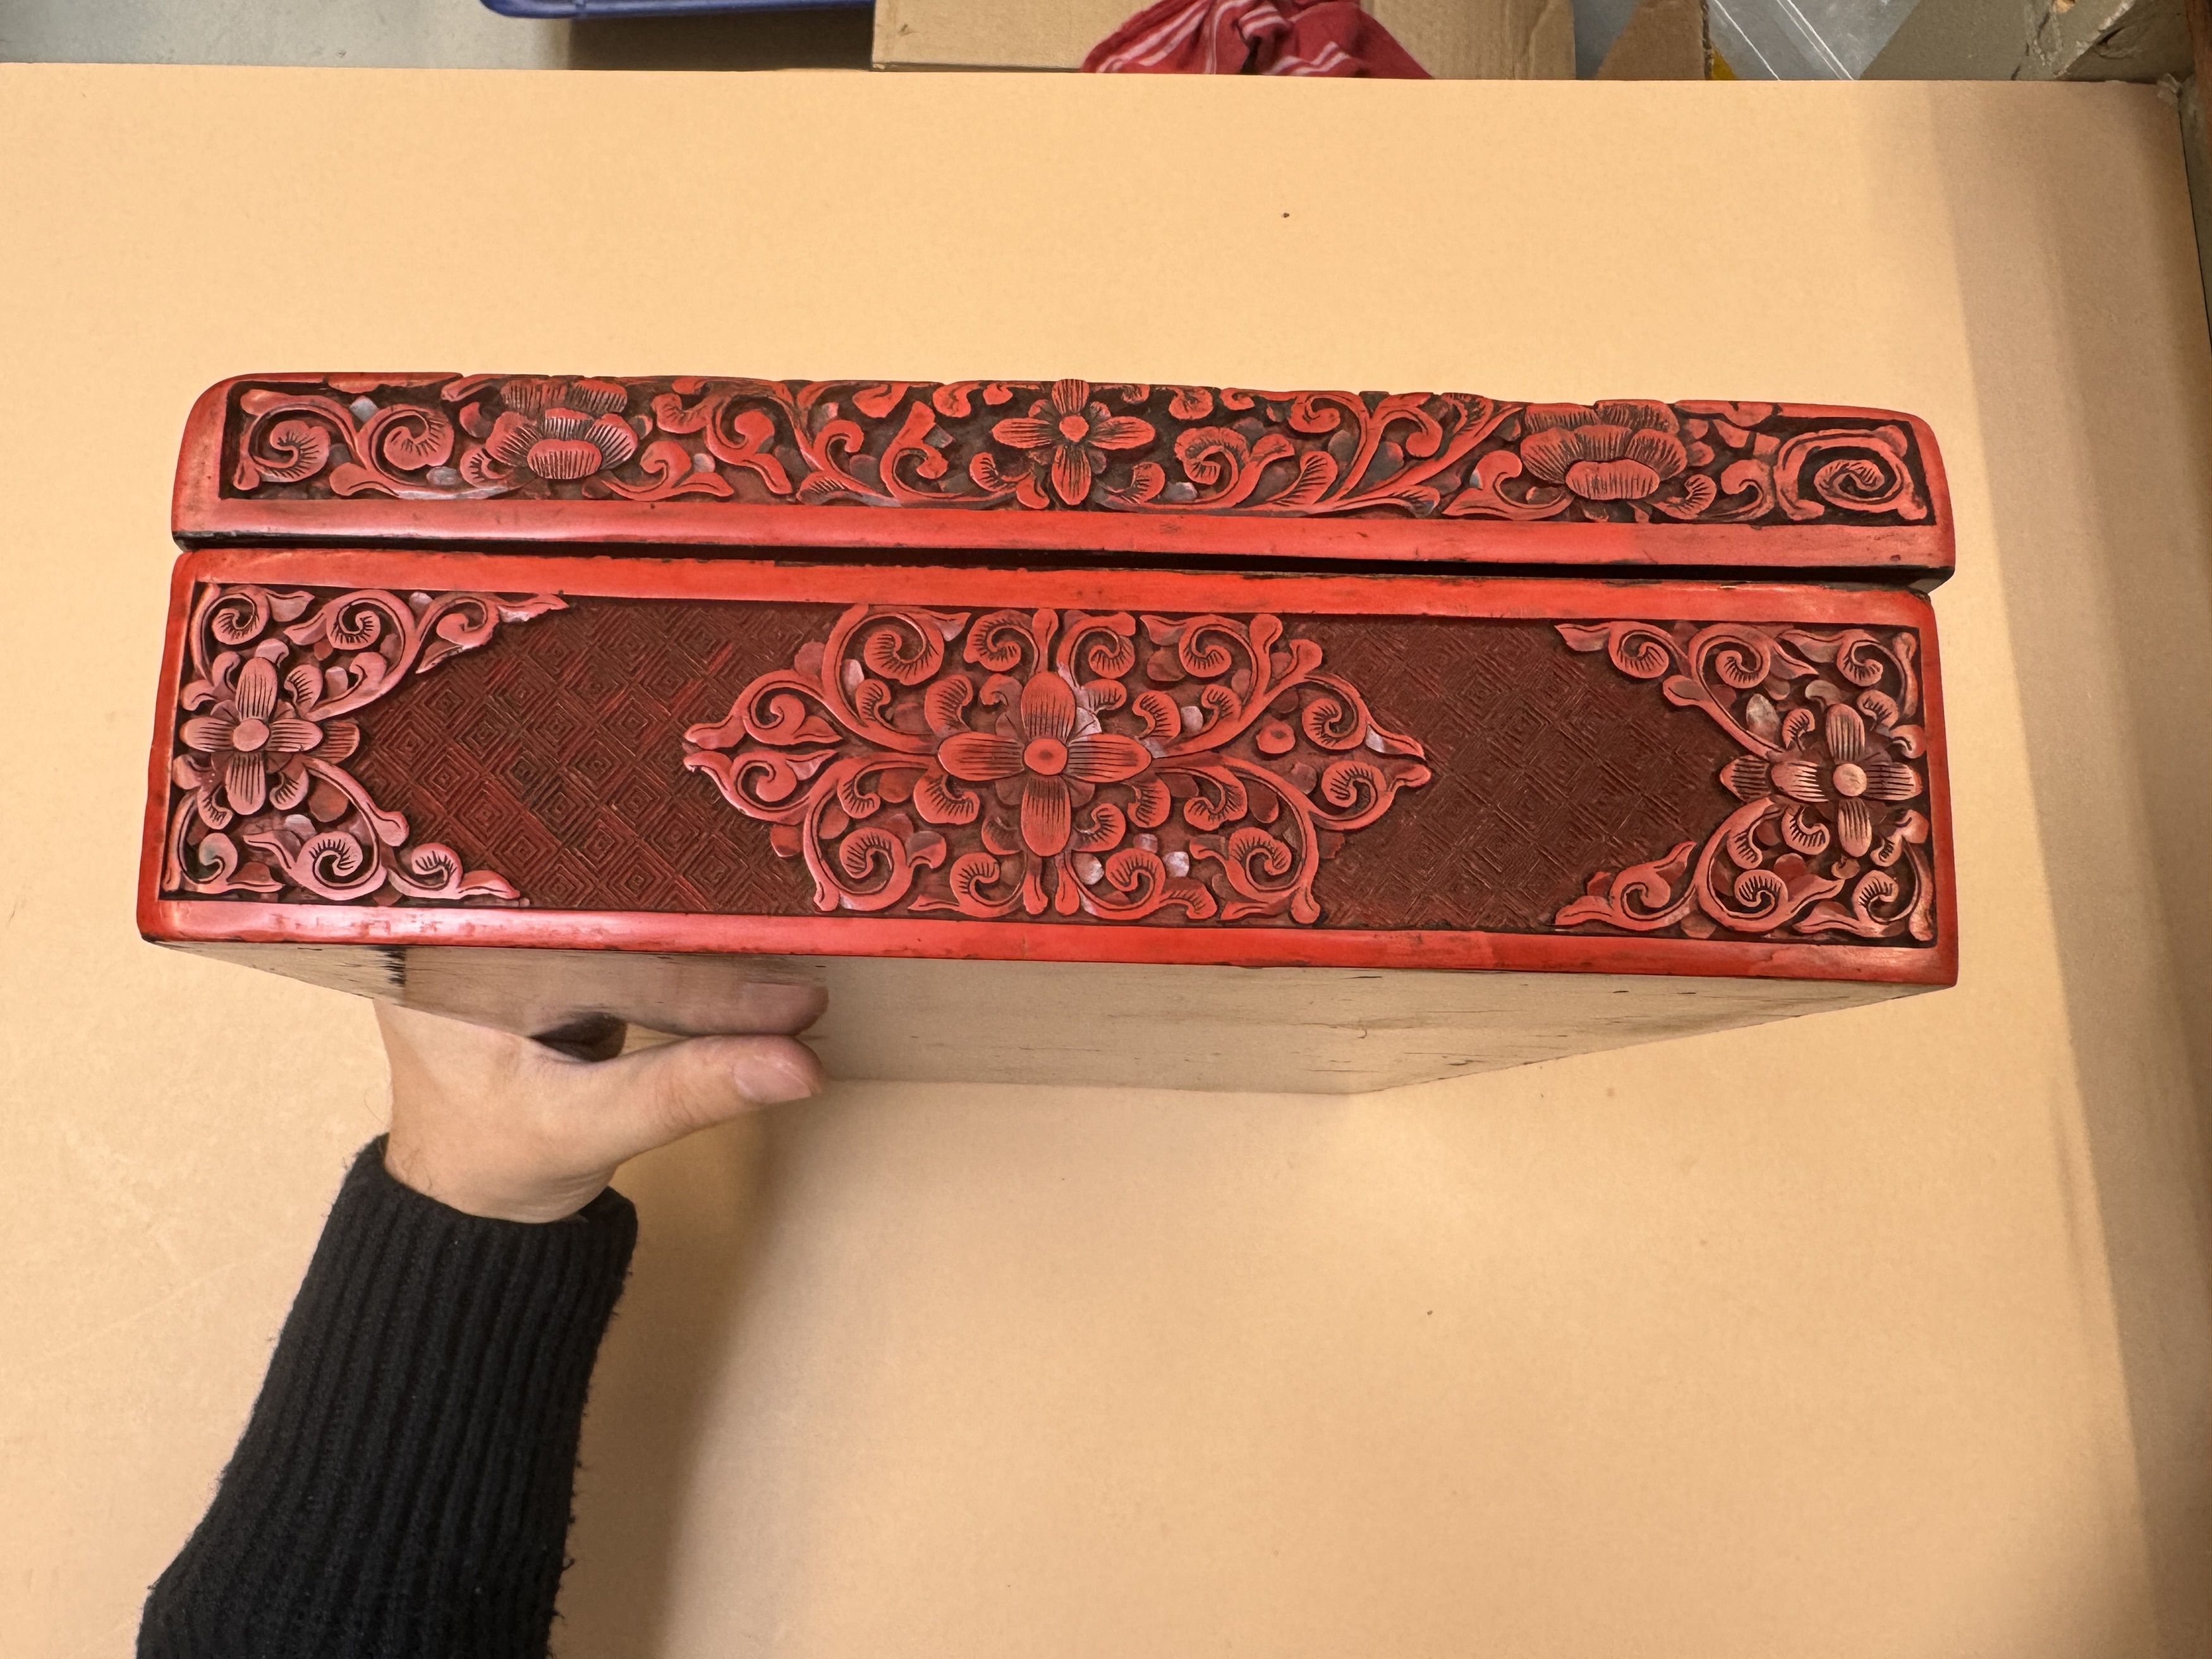 A LARGE AND FINE CHINESE CINNABAR LACQUER 'FIGURAL' BOX AND COVER 早十九世紀 剔紅人物故事圖紋方蓋盒 - Image 40 of 54